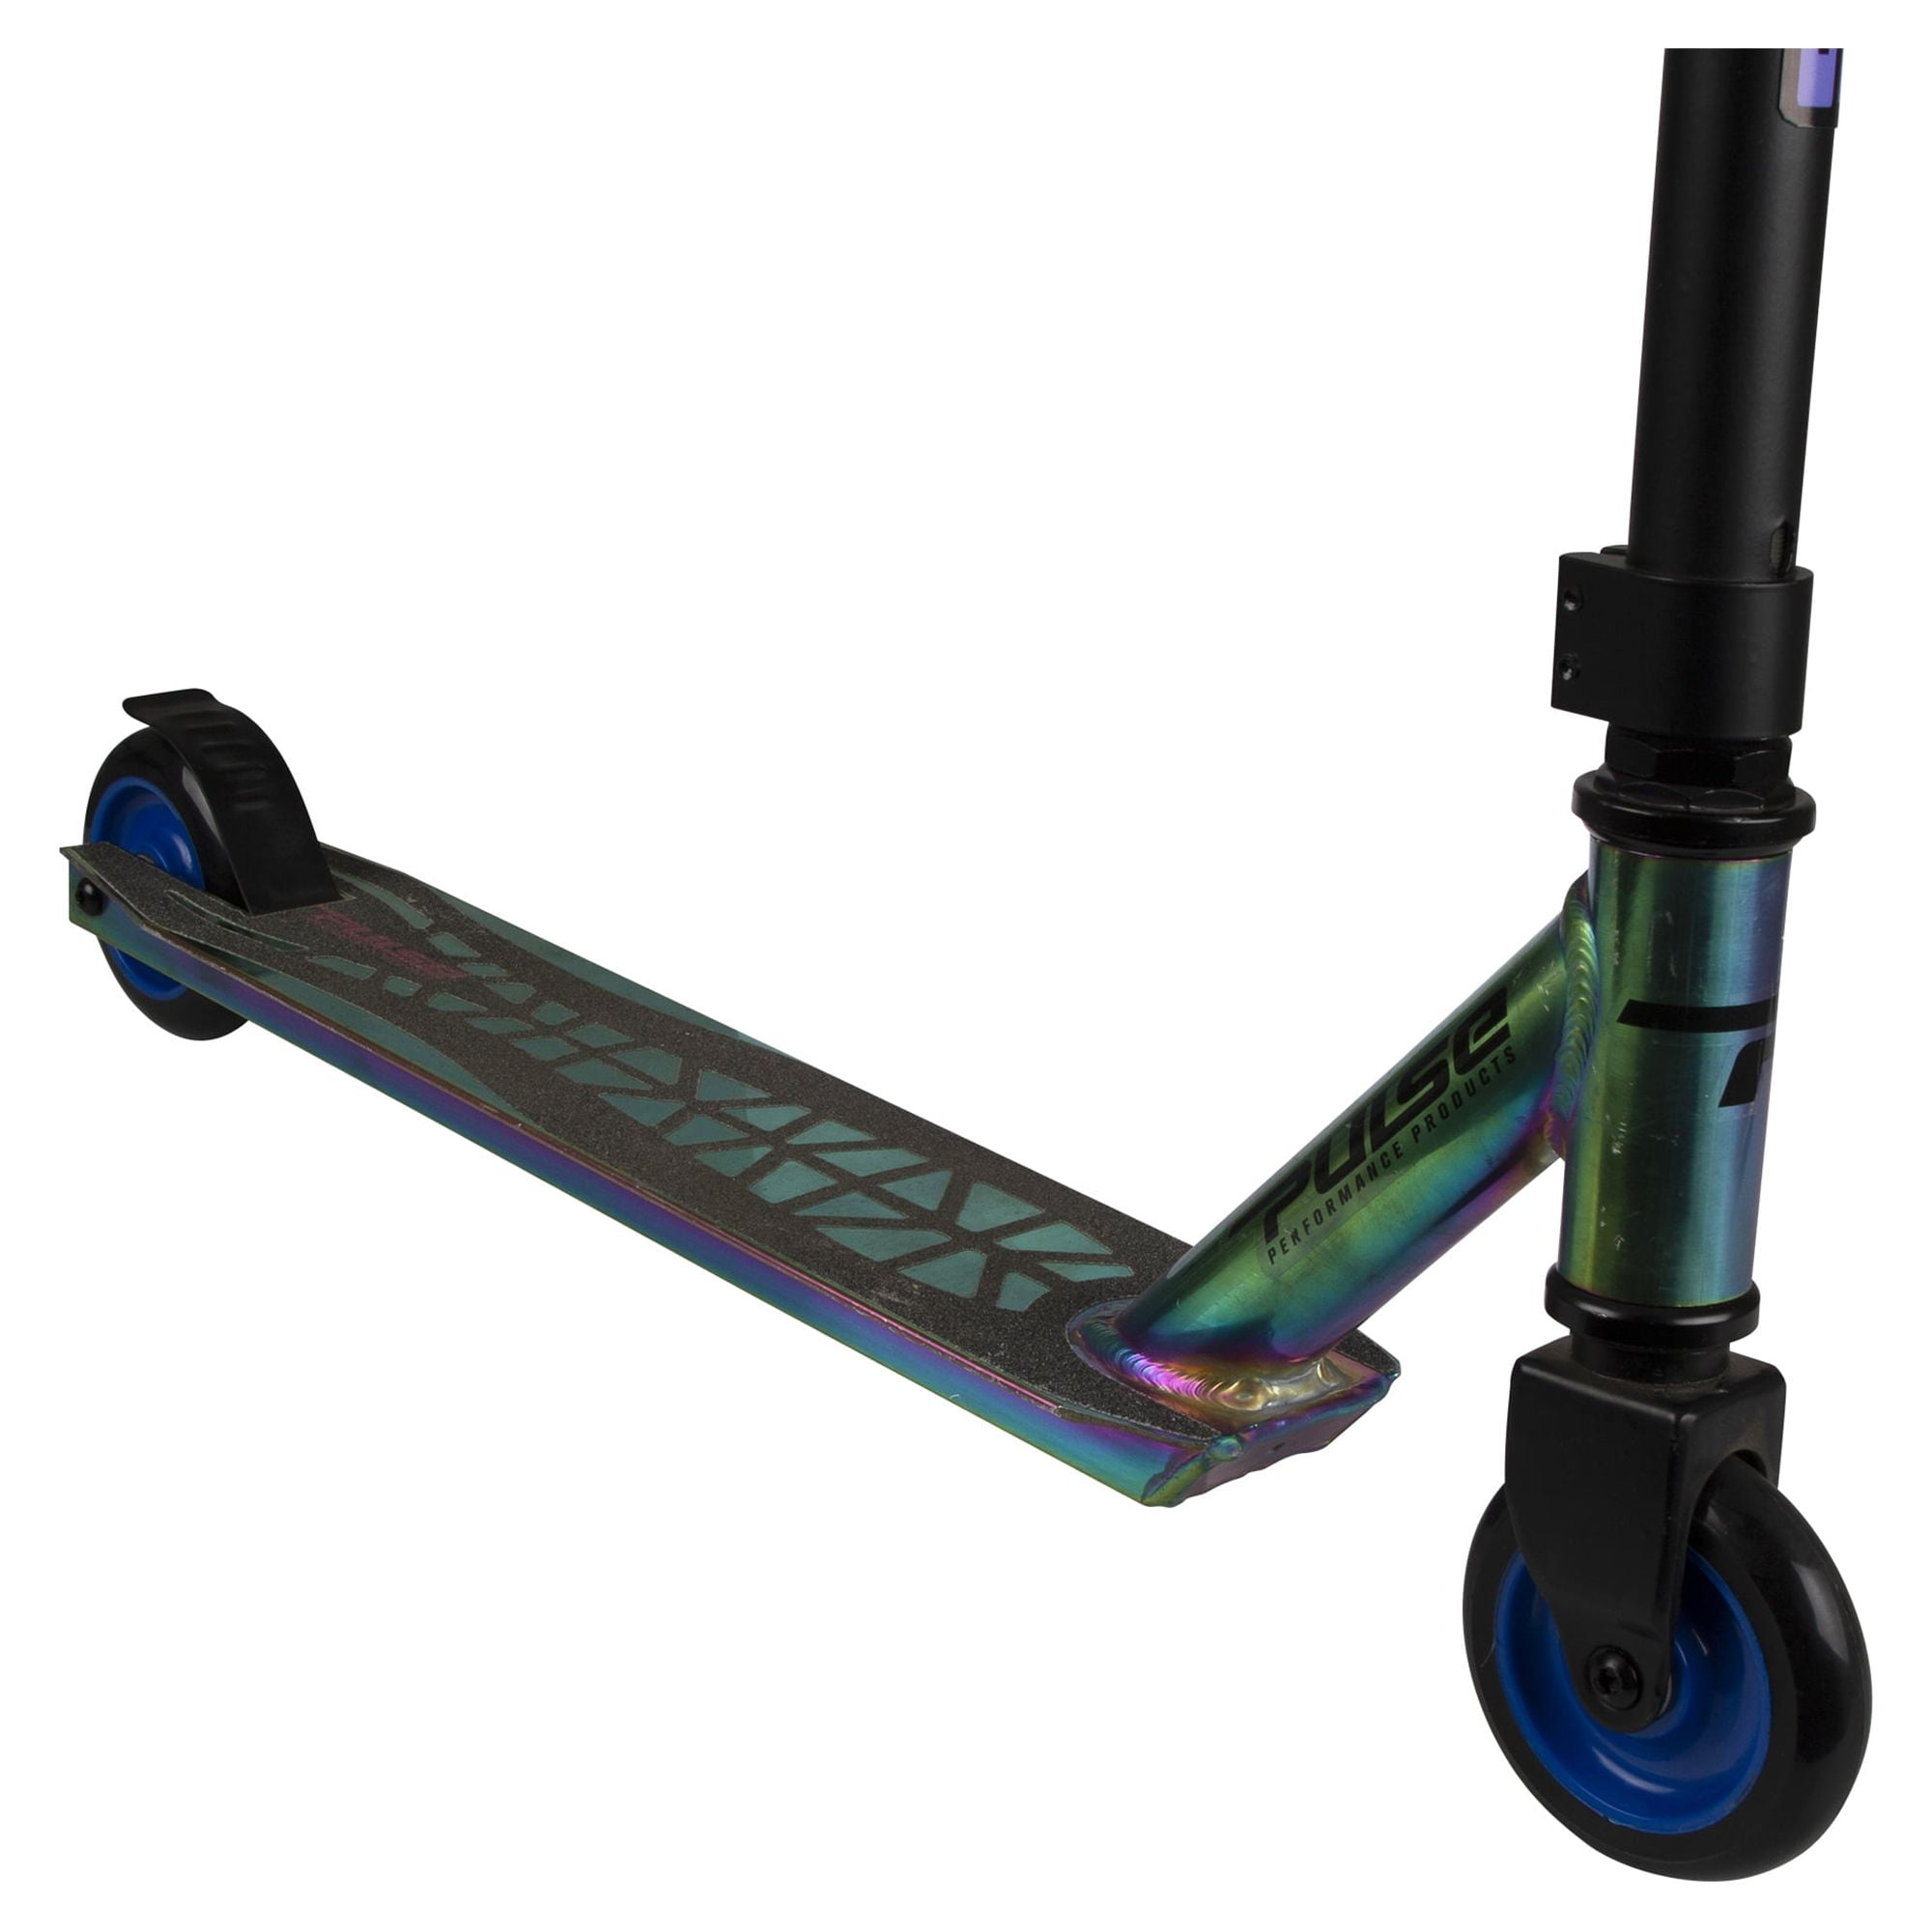 Pulse Performance Products Burner Pro Freestyle Scooter